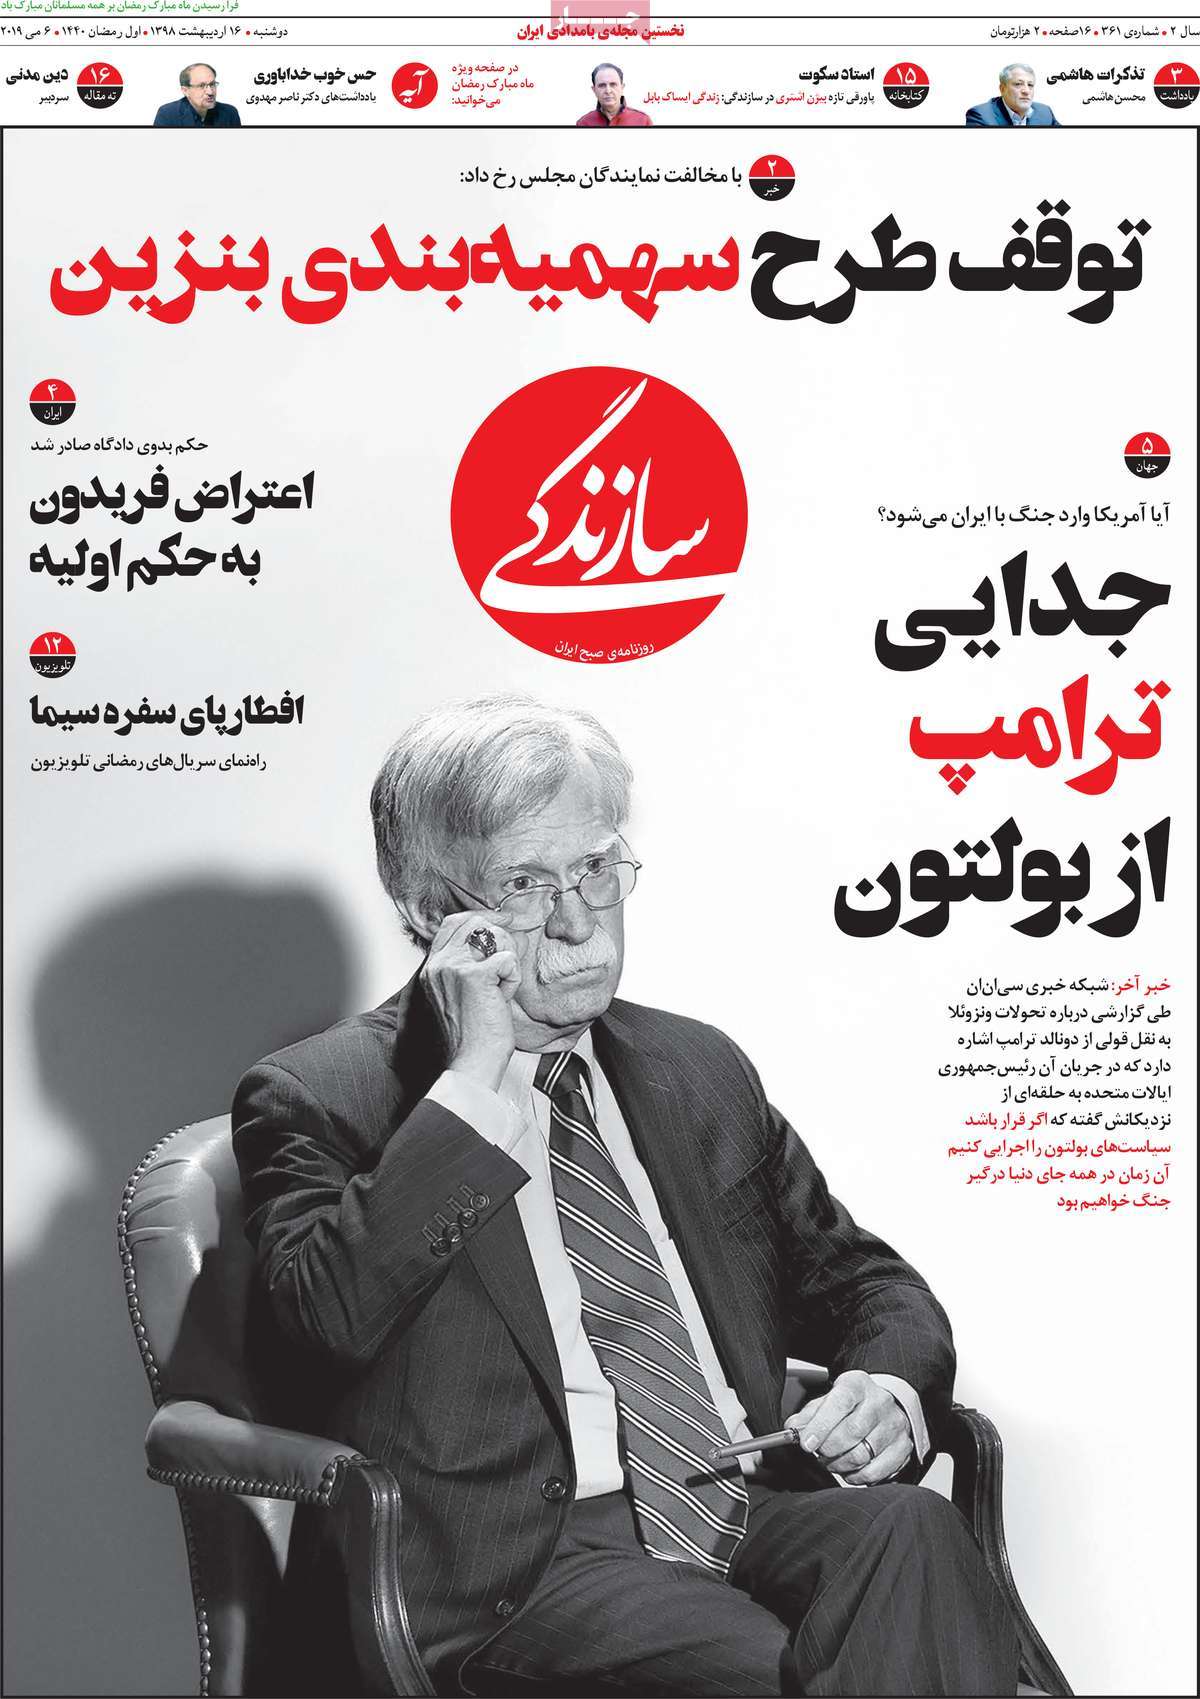 A Look at Iranian Newspaper Front Pages on May 6